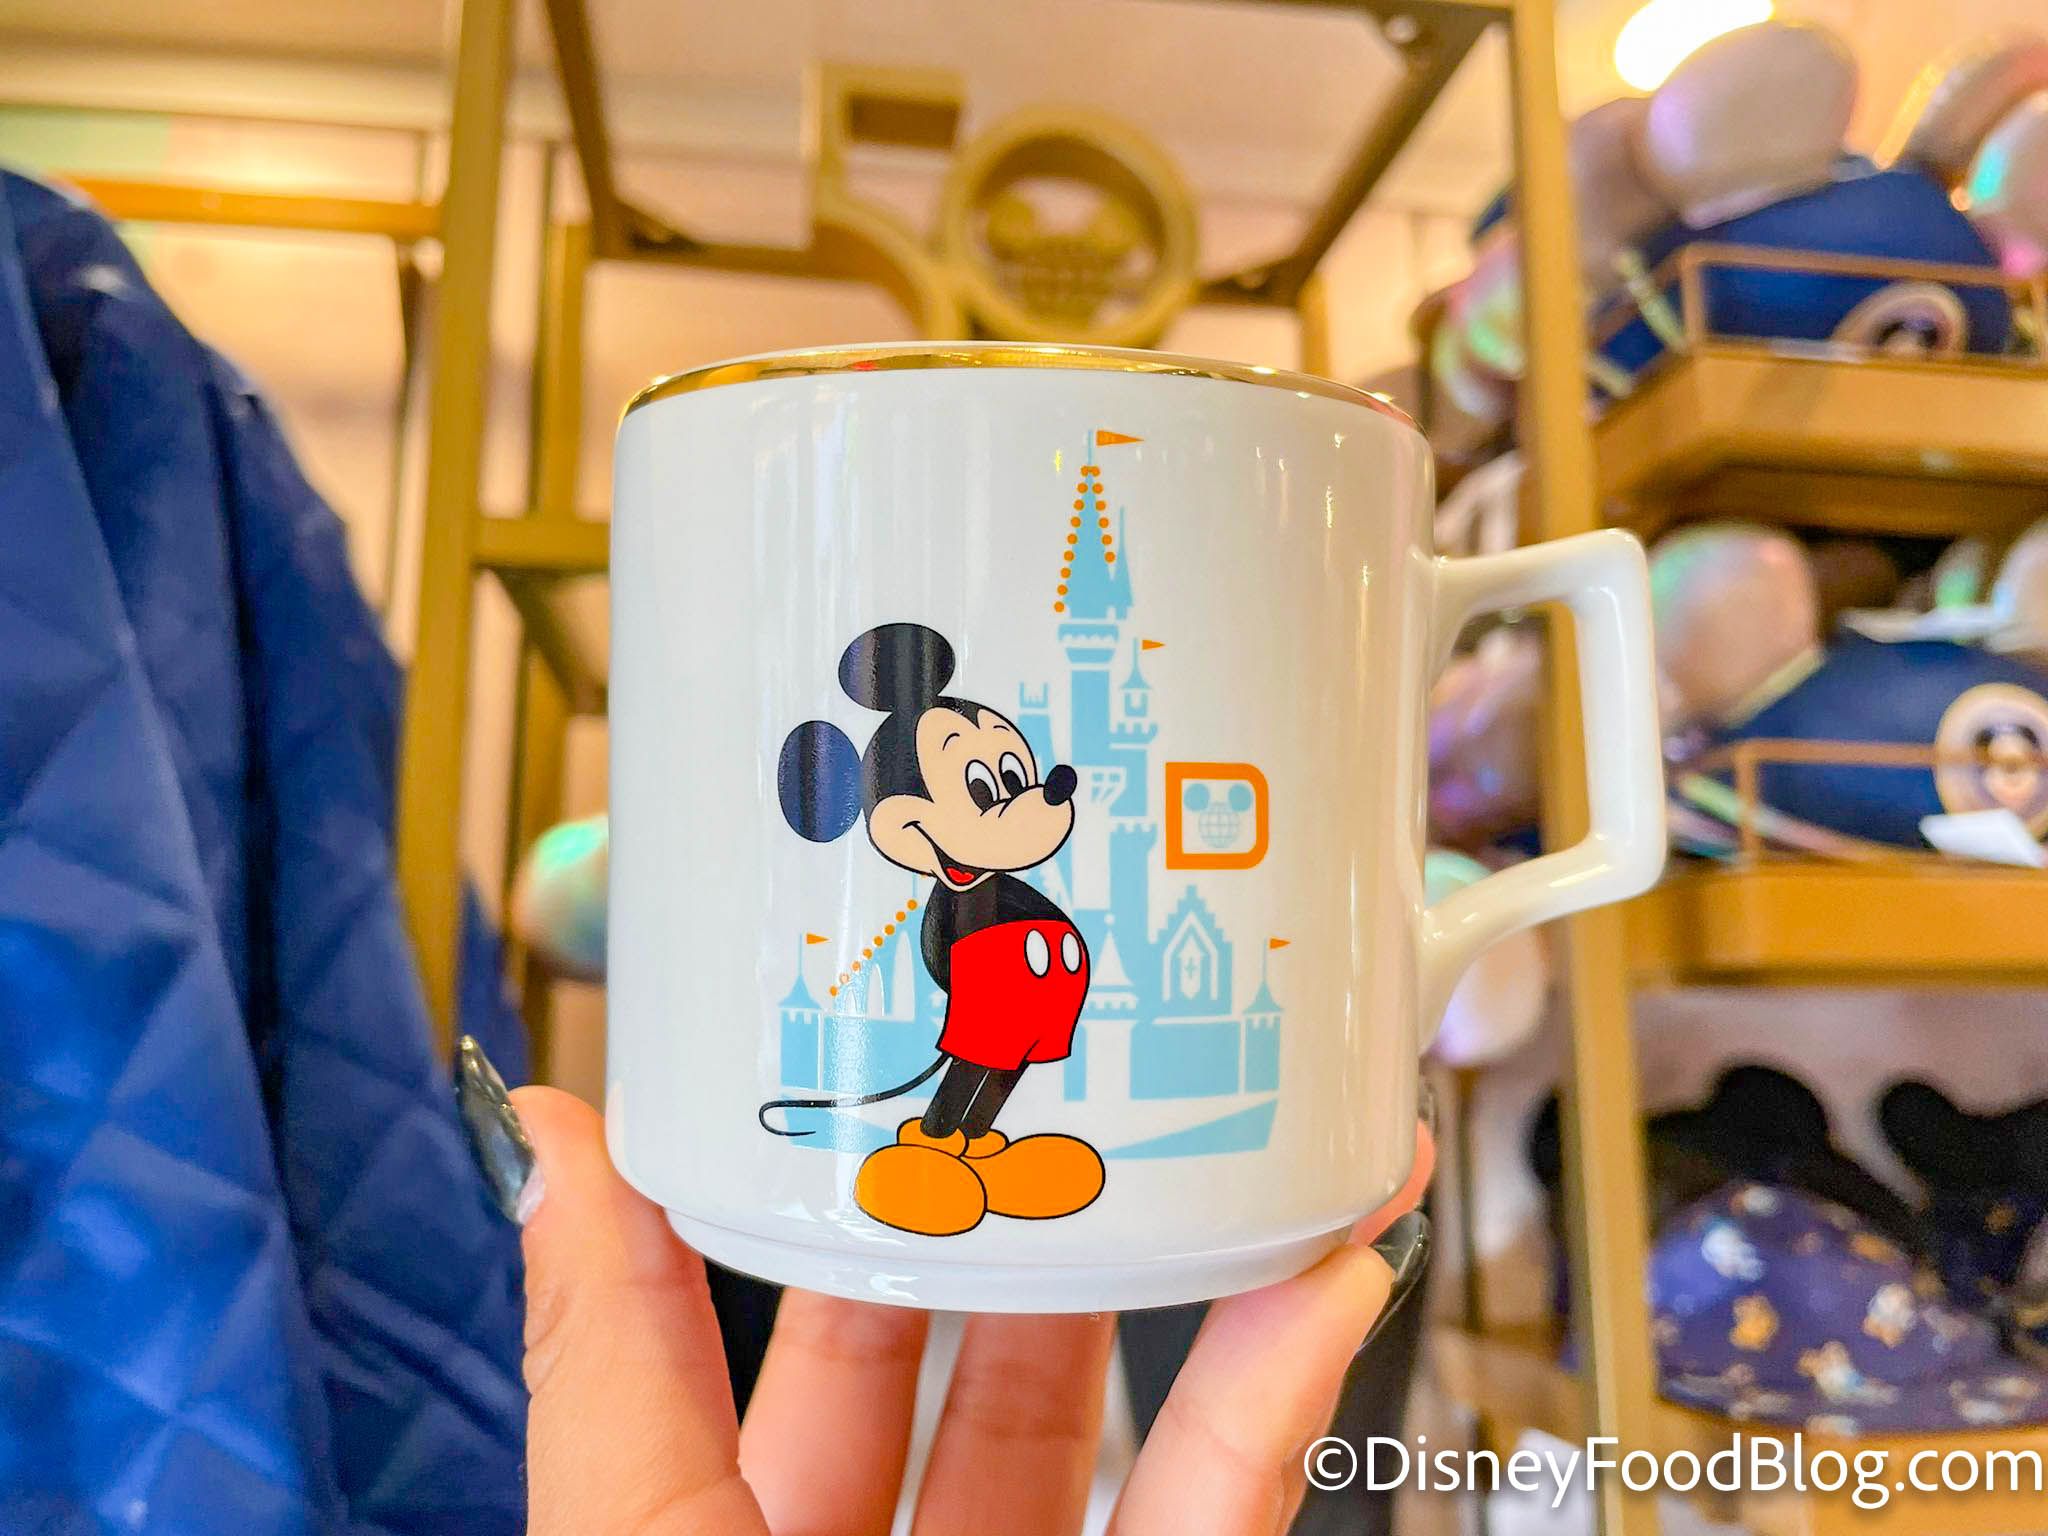 Tinker Bell and Pluto Star in Our Latest Disney World Mug Haul